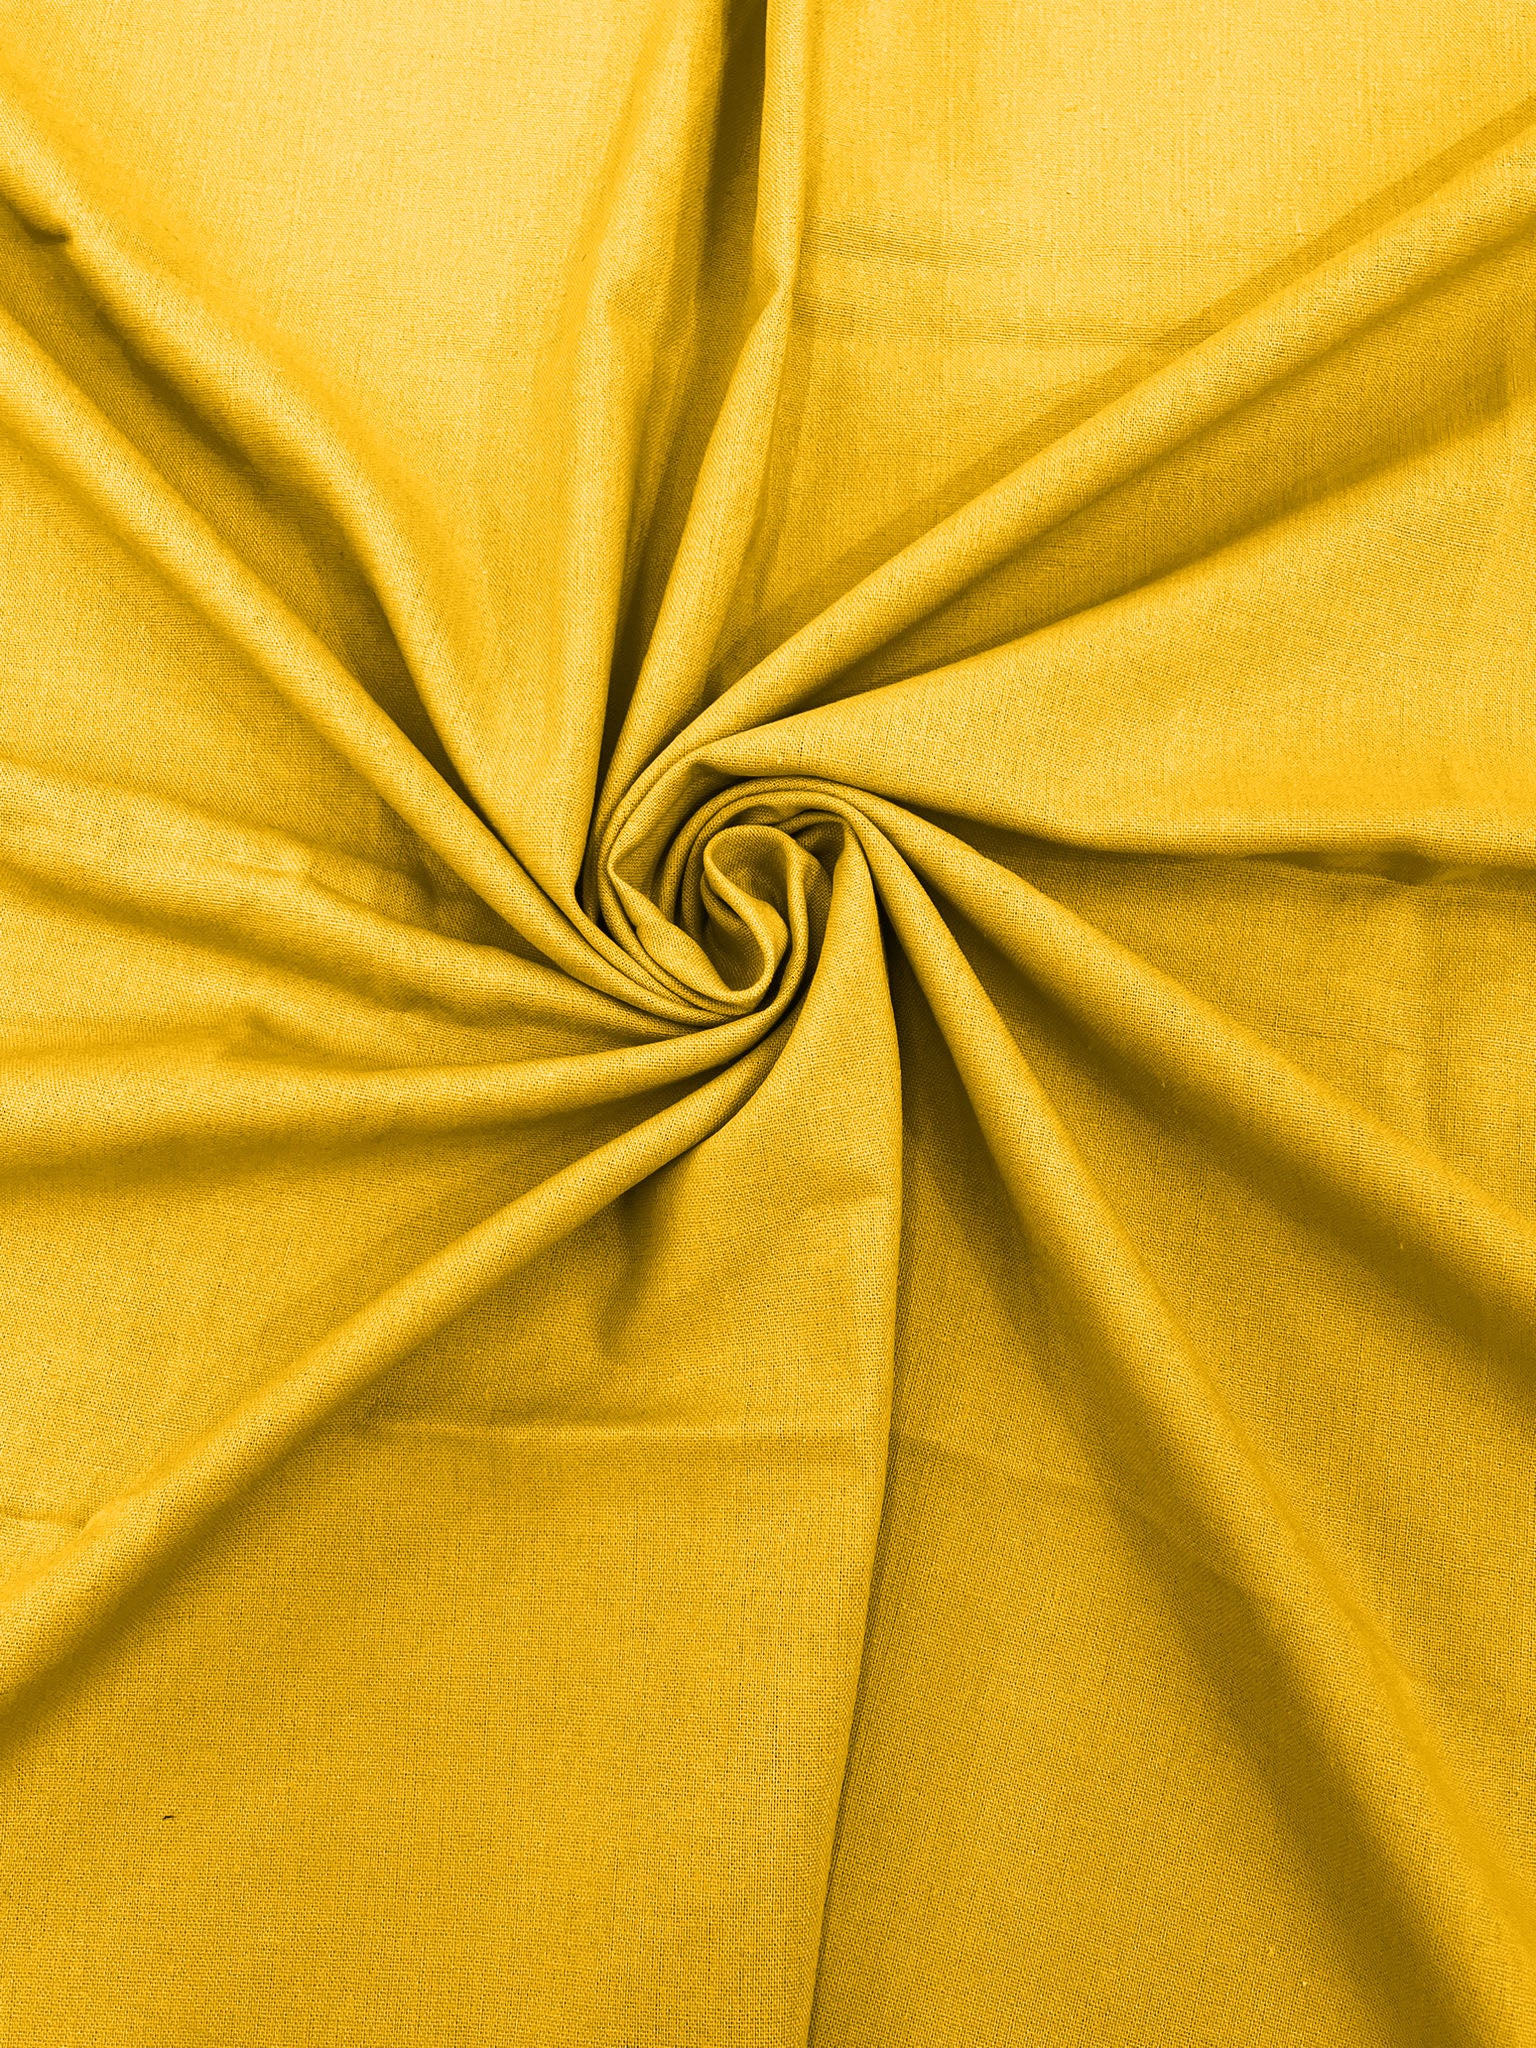 Yellow Medium Weight Natural Linen Fabric/50 " Wide/Clothing